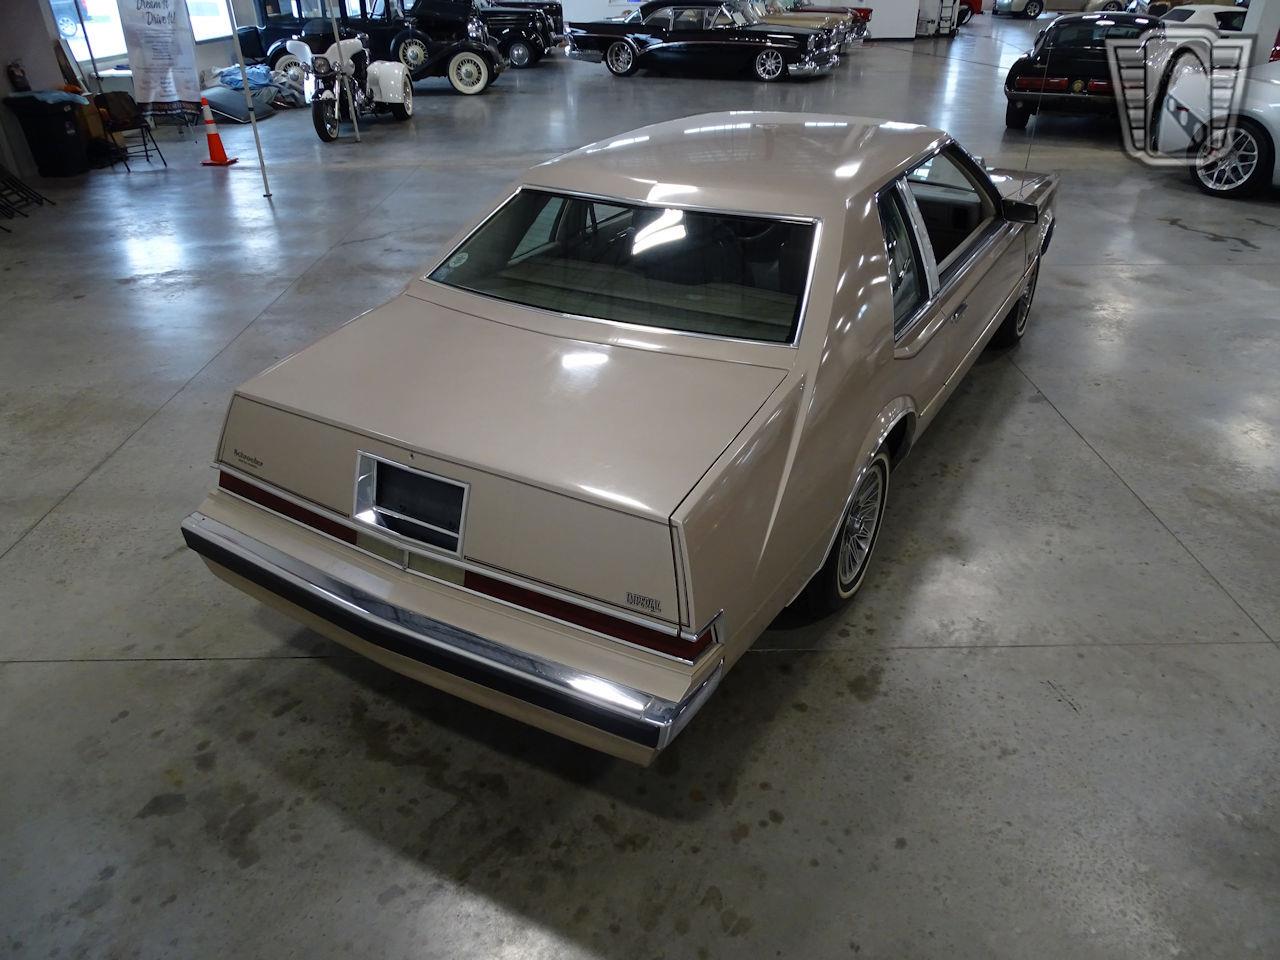 1981 Chrysler Imperial for sale in O'Fallon, IL – photo 81